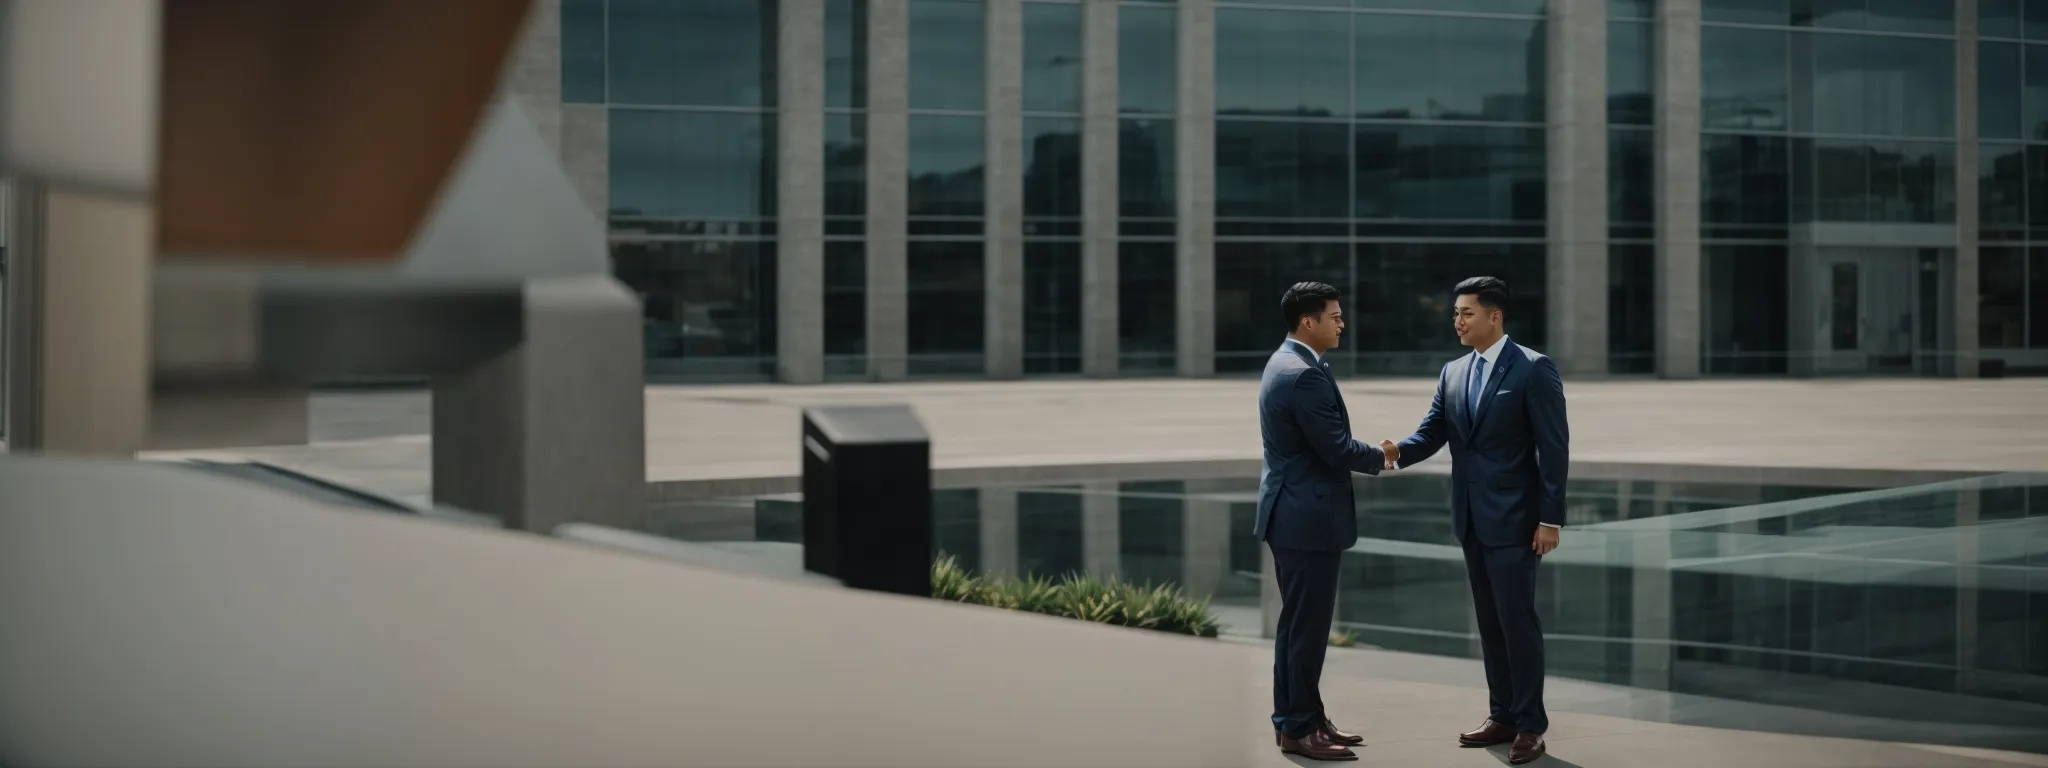 two business professionals shaking hands in front of a large, modern office building, signaling an agreement.